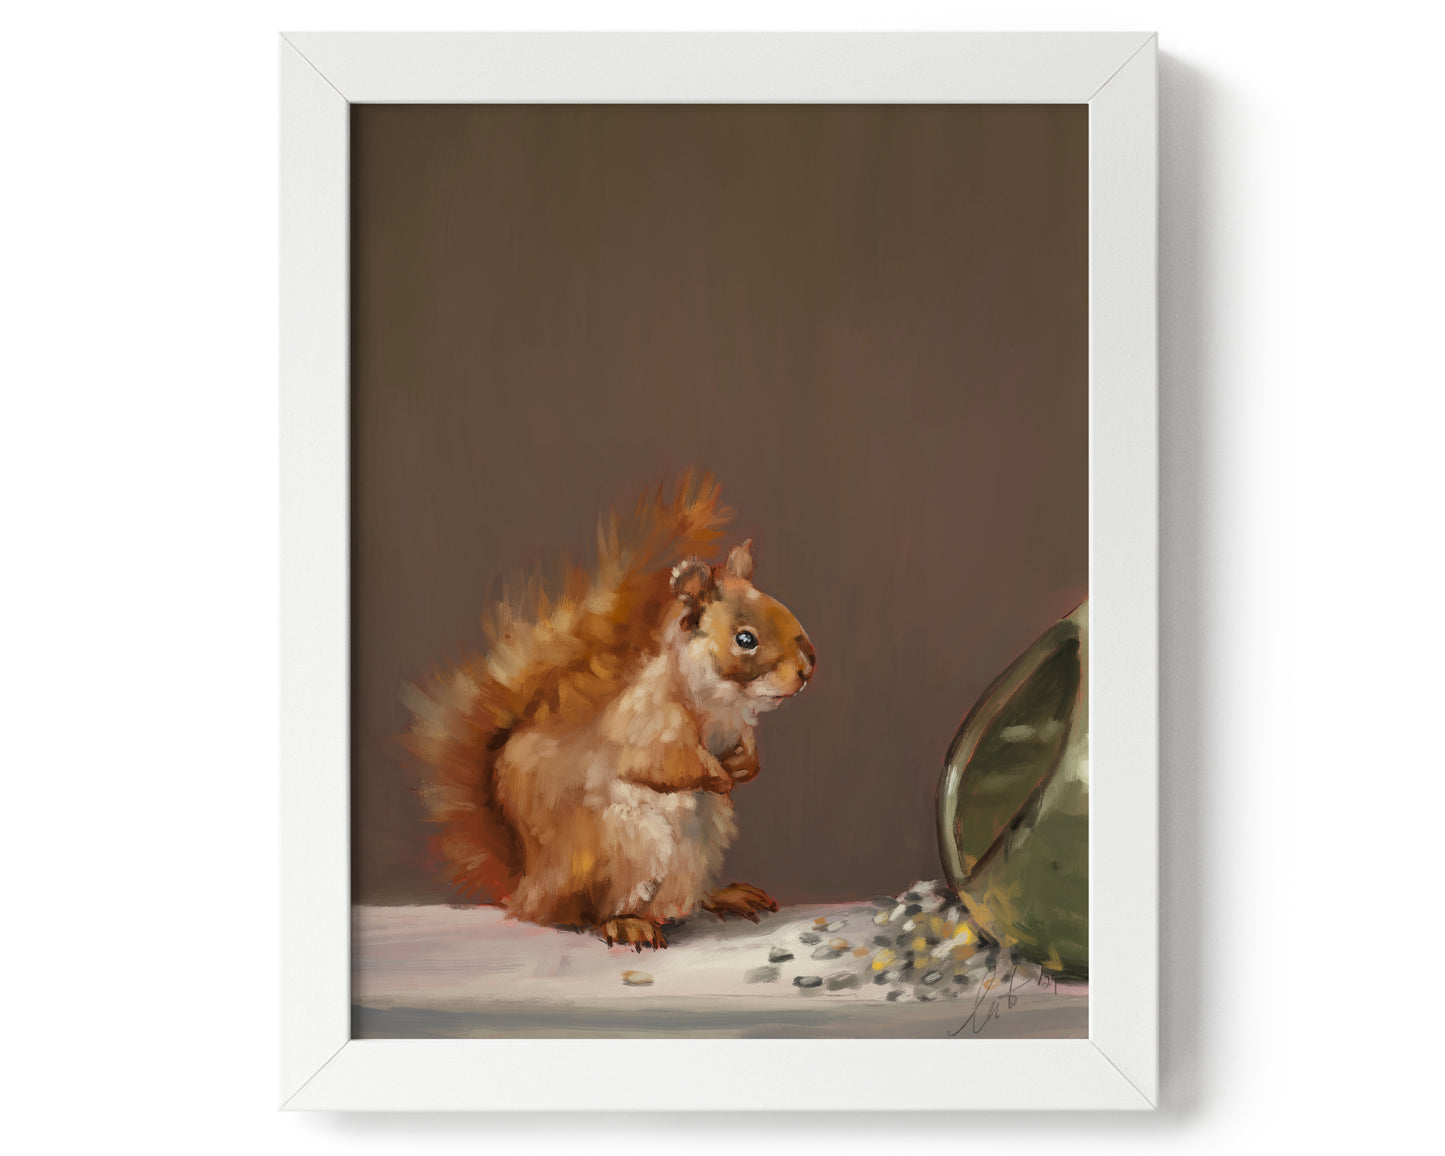 "Titi the Squirrel" by Catherine Hébert - Red Squirrel Oil Painting Giclée Art Print - 0"x0" size